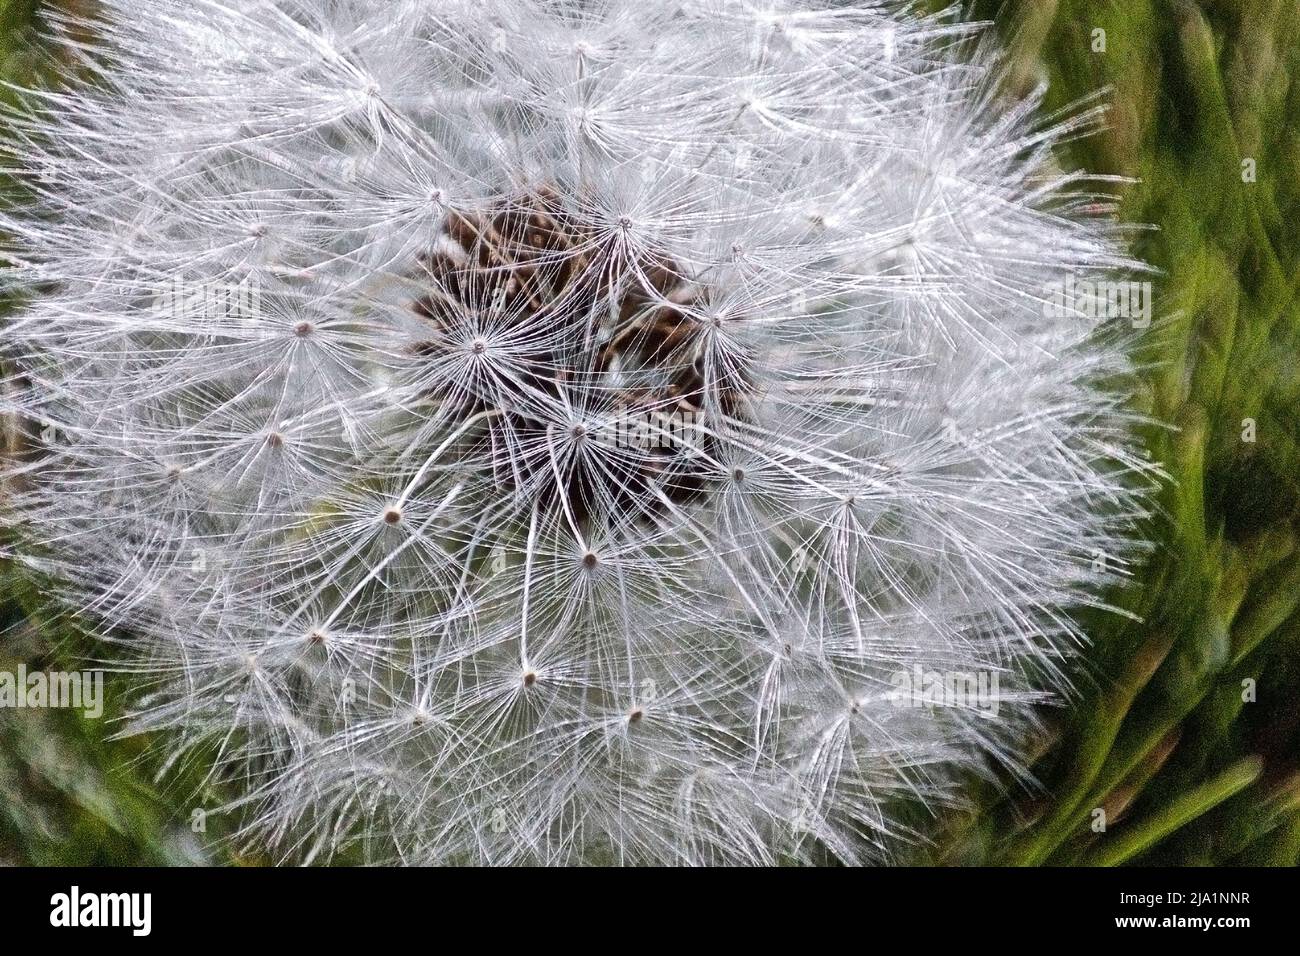 Close up detail of the spring-blooming dandelions. Stock Photo